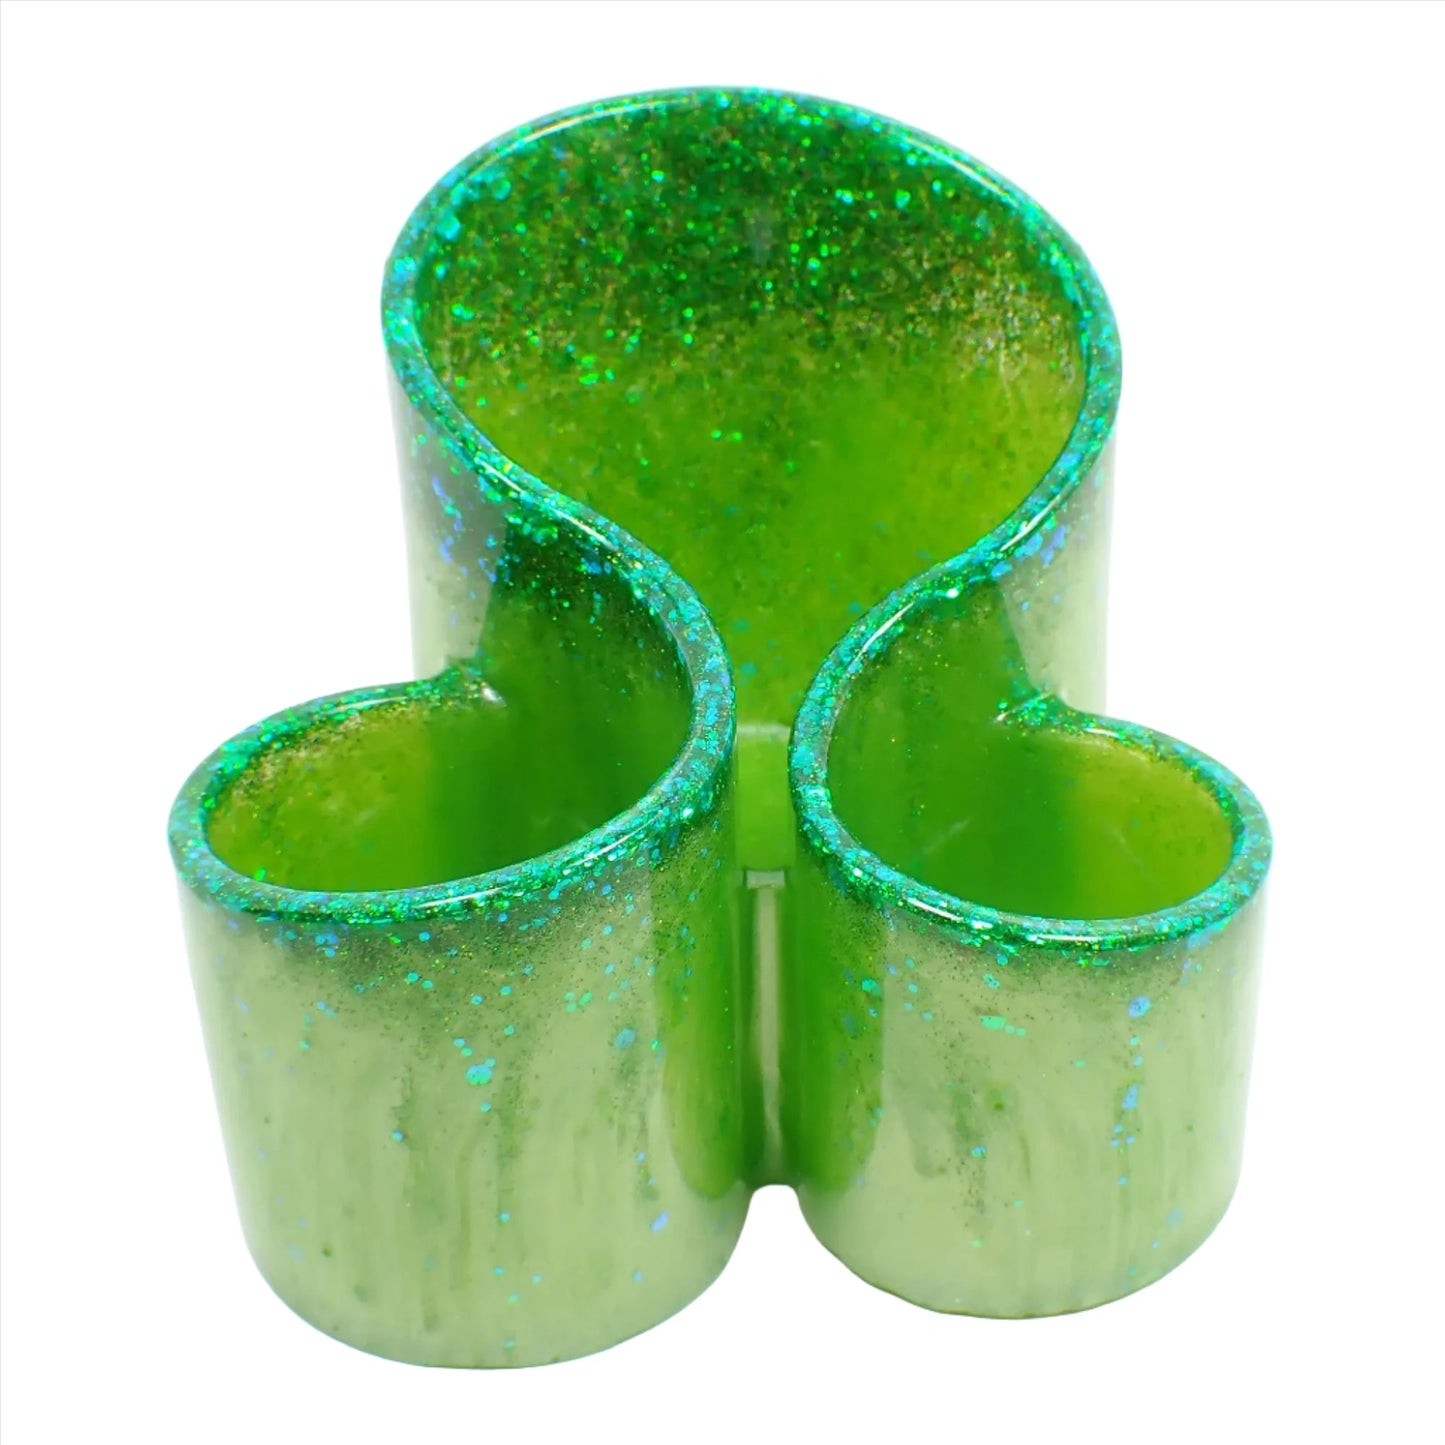 Front view of the handmade resin makeup brush holder. It has lime green resin with iridescent glitter at the top. There are three round areas to hold the brushes with the back having the tallest side.